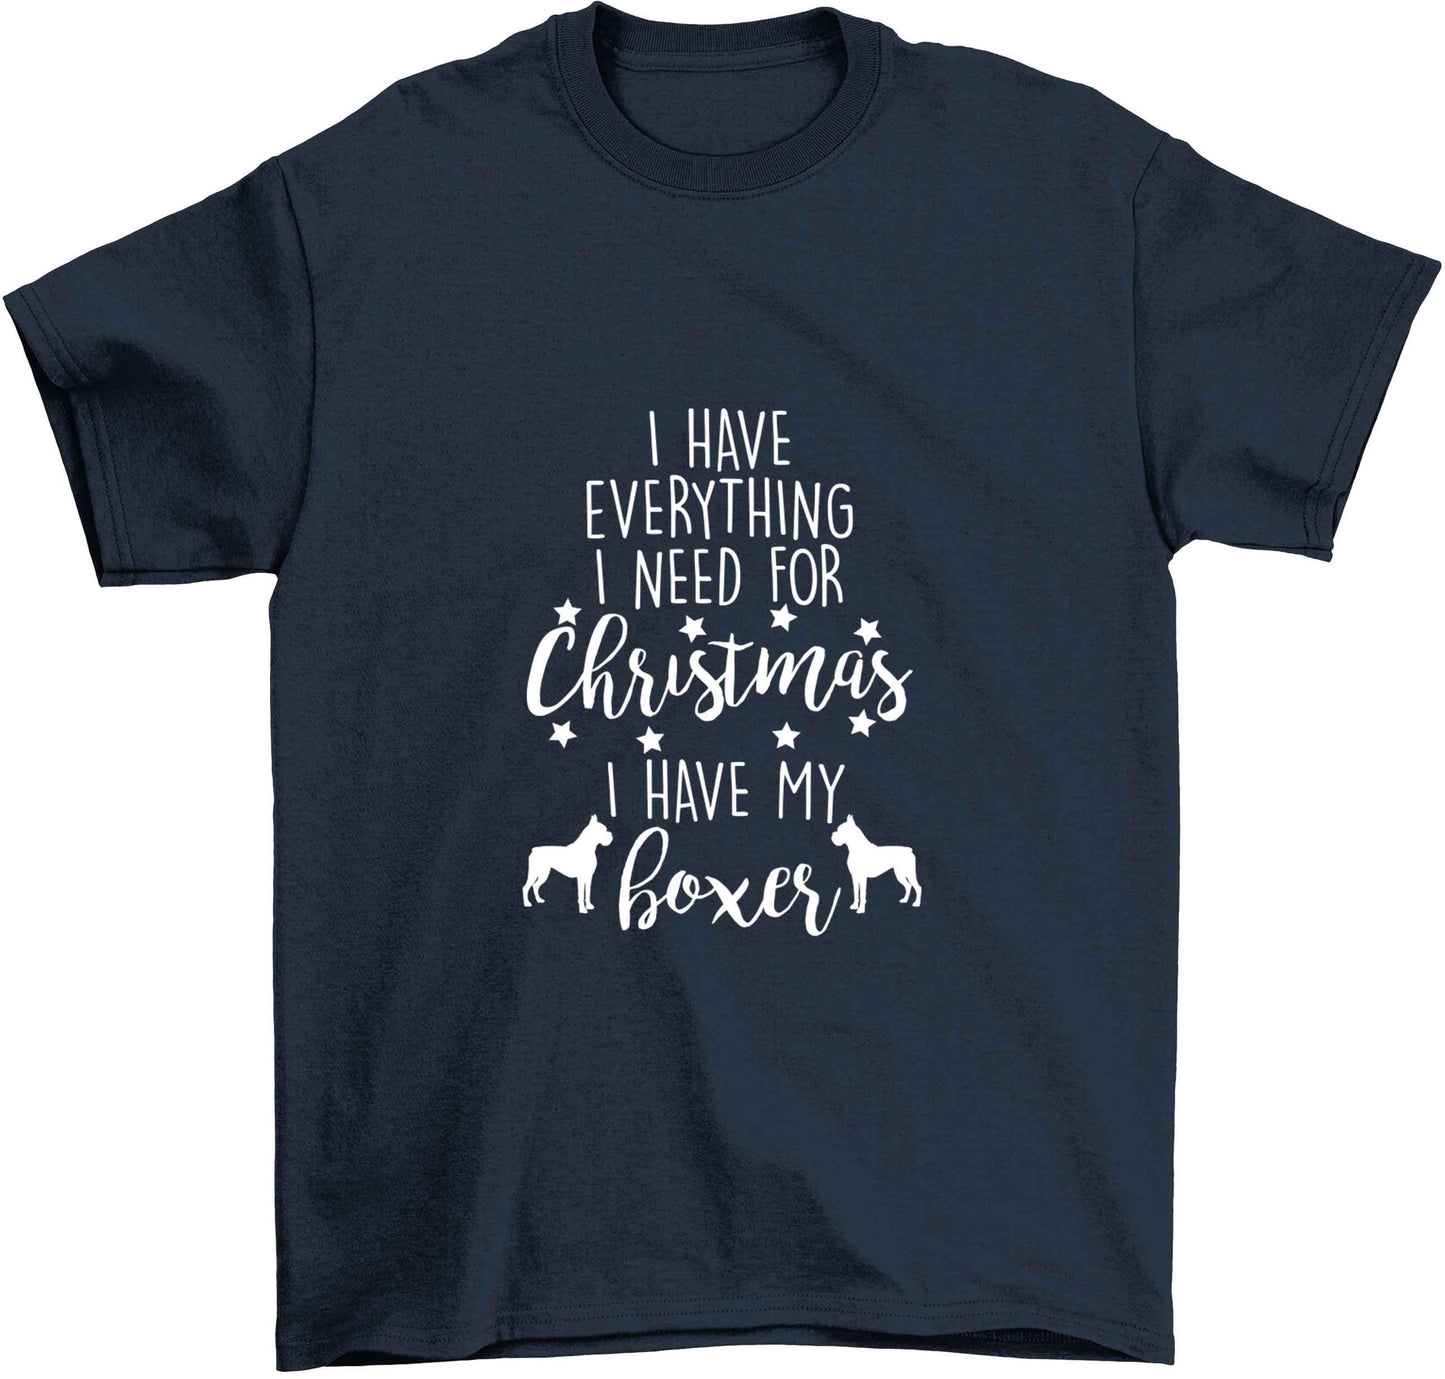 I have everything I need for Christmas I have my boxer Children's navy Tshirt 12-13 Years